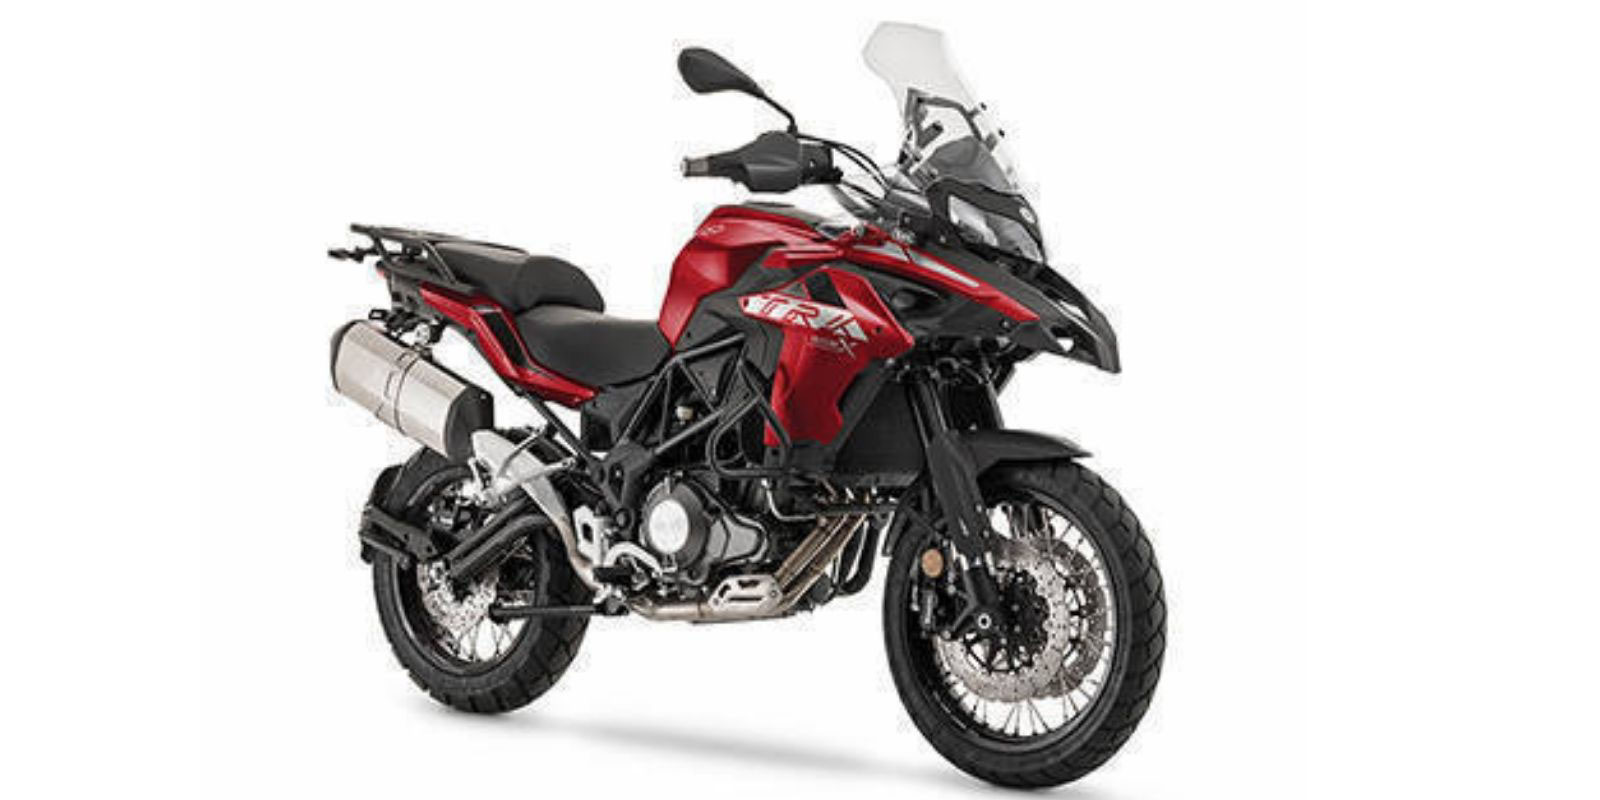 2021 BENELLI TRK 502 BS6 LAUNCHED INDIA